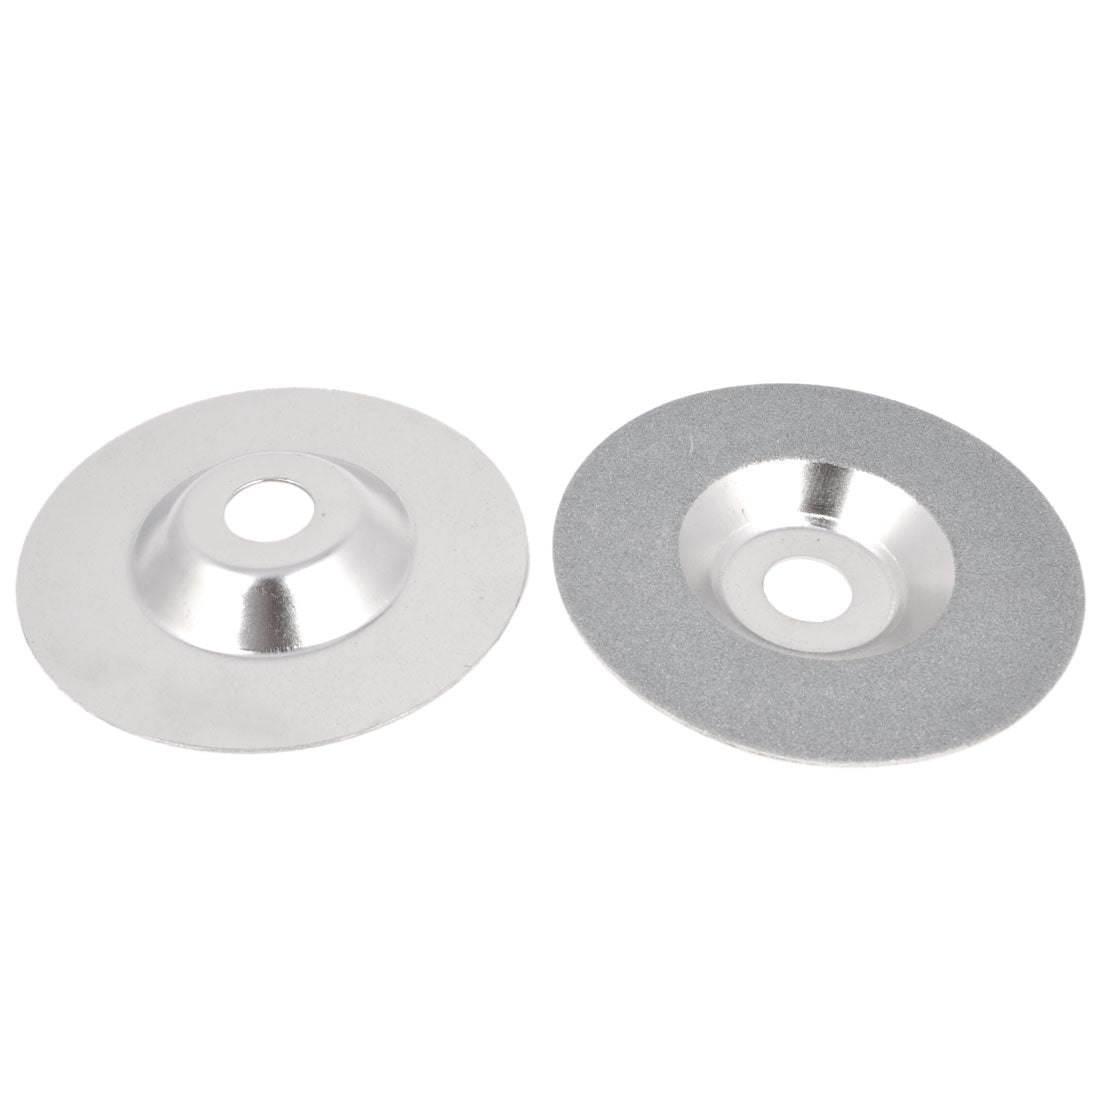 Uxcell Uxcell 100mm Dia Diamond Cut Off Cutter Wheel Disc Die Grinder Silver Tone 2pcs